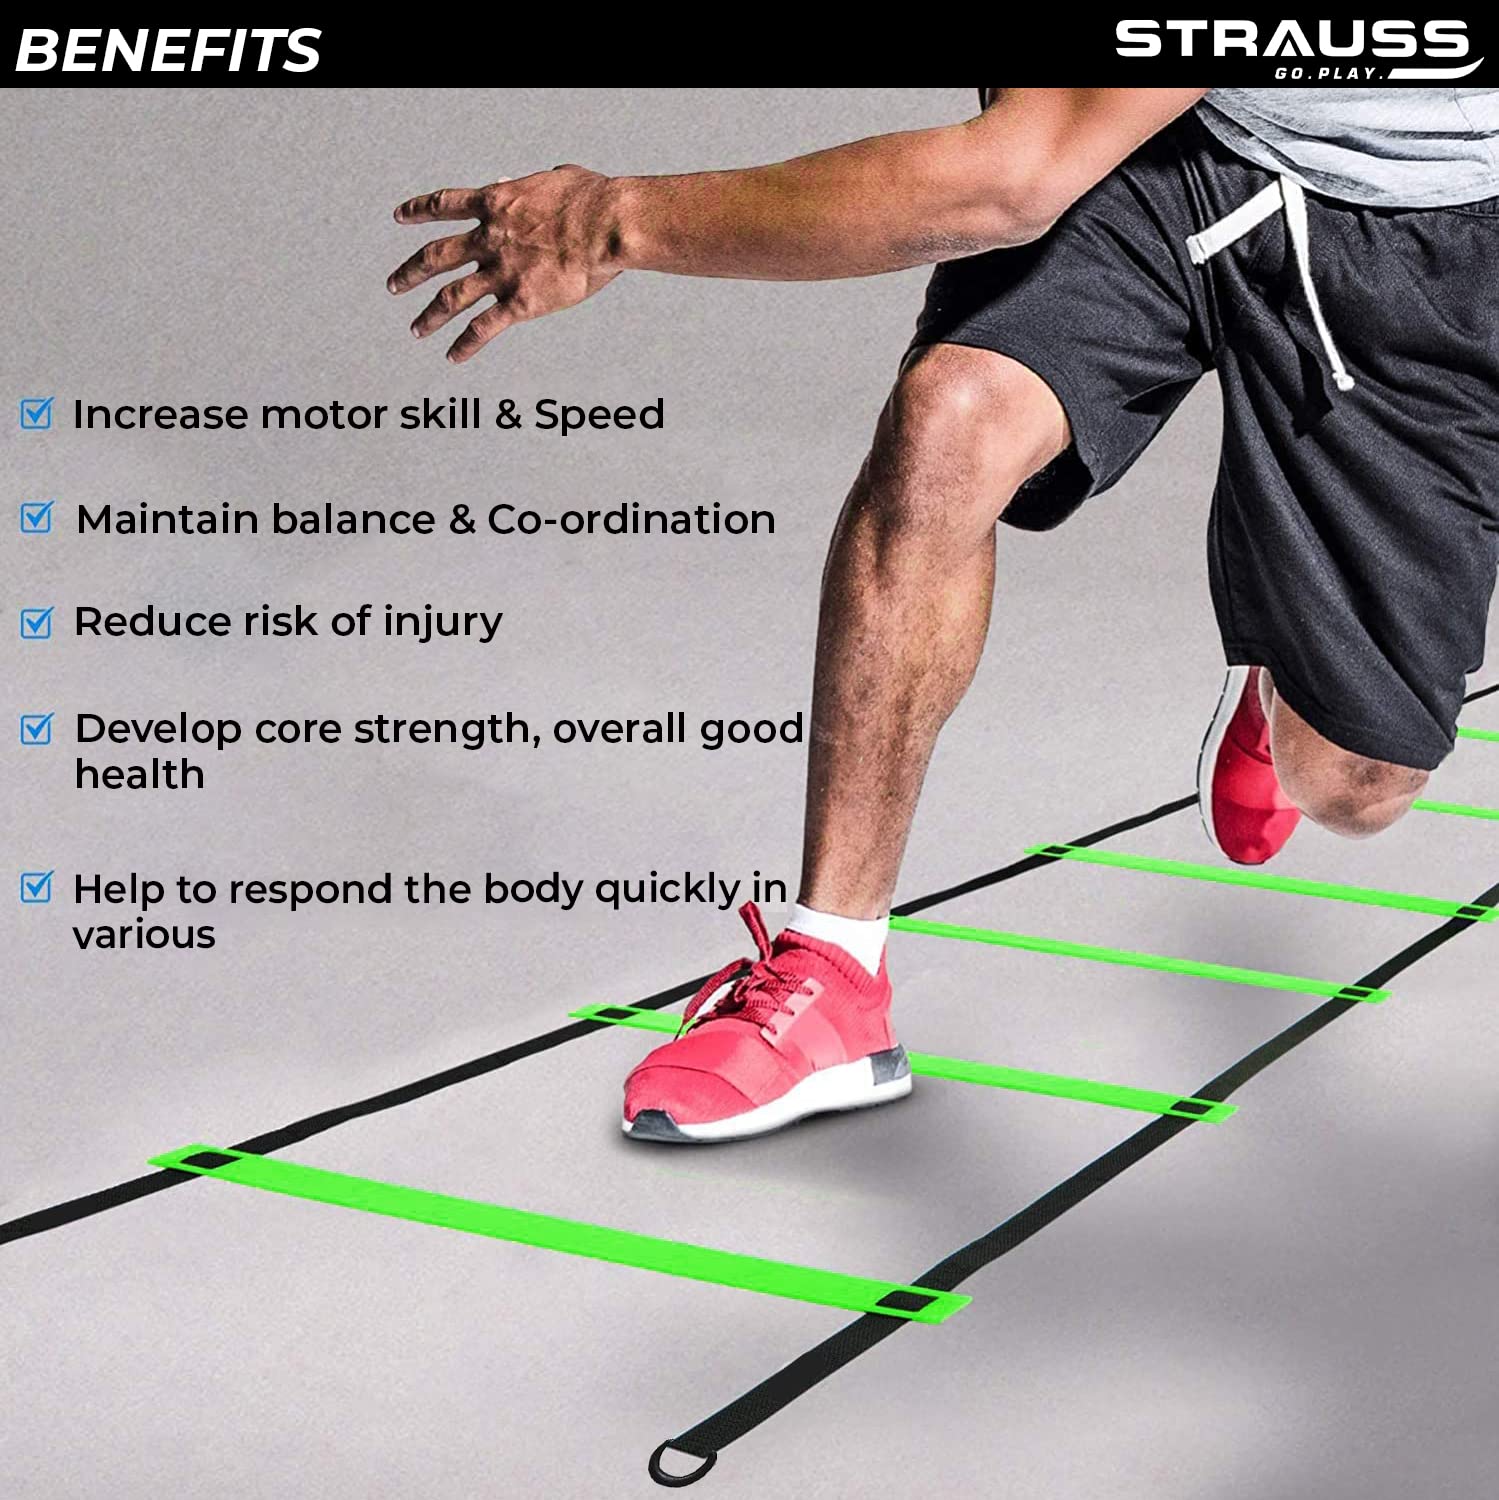 Strauss Adjustable Exercise Agility Ladder, 6m, (Green)